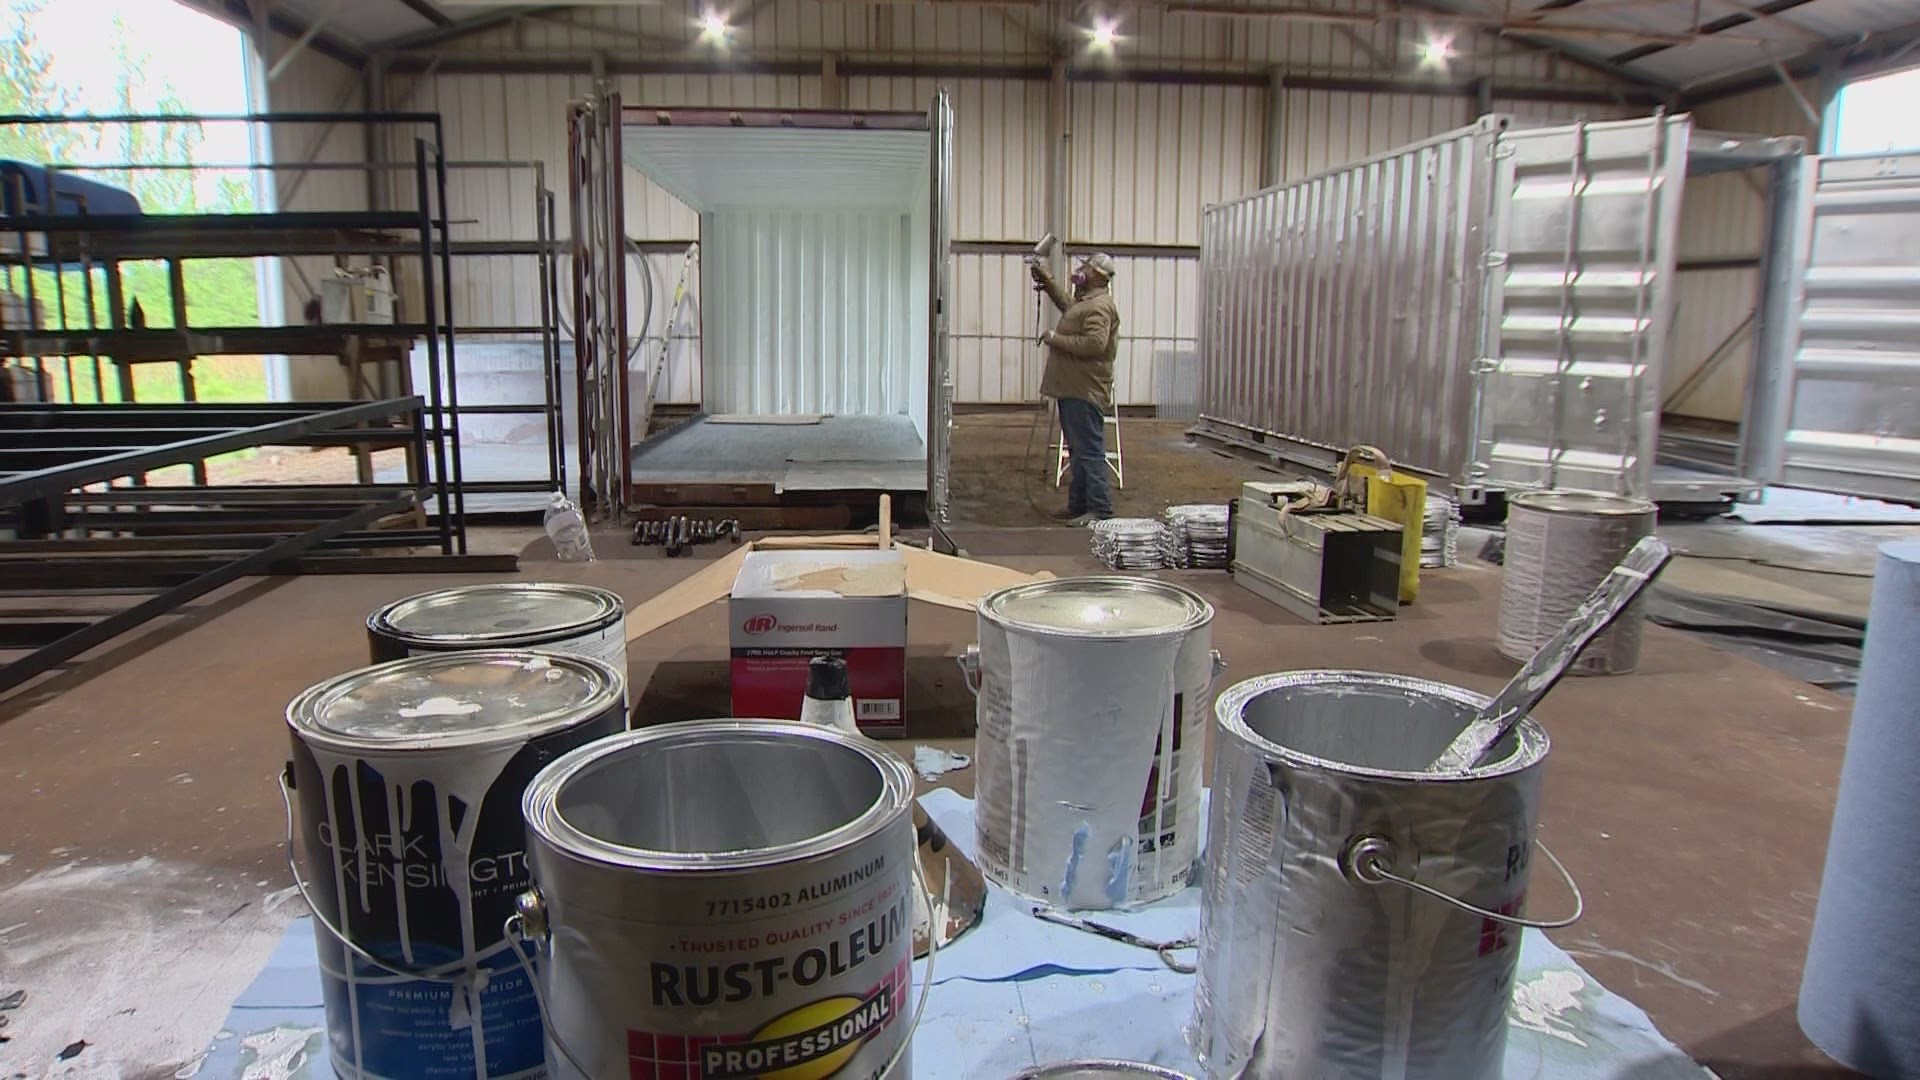 Here's how to Texas A&M students in east Texas are repurposing waste and pumping out the rewards.